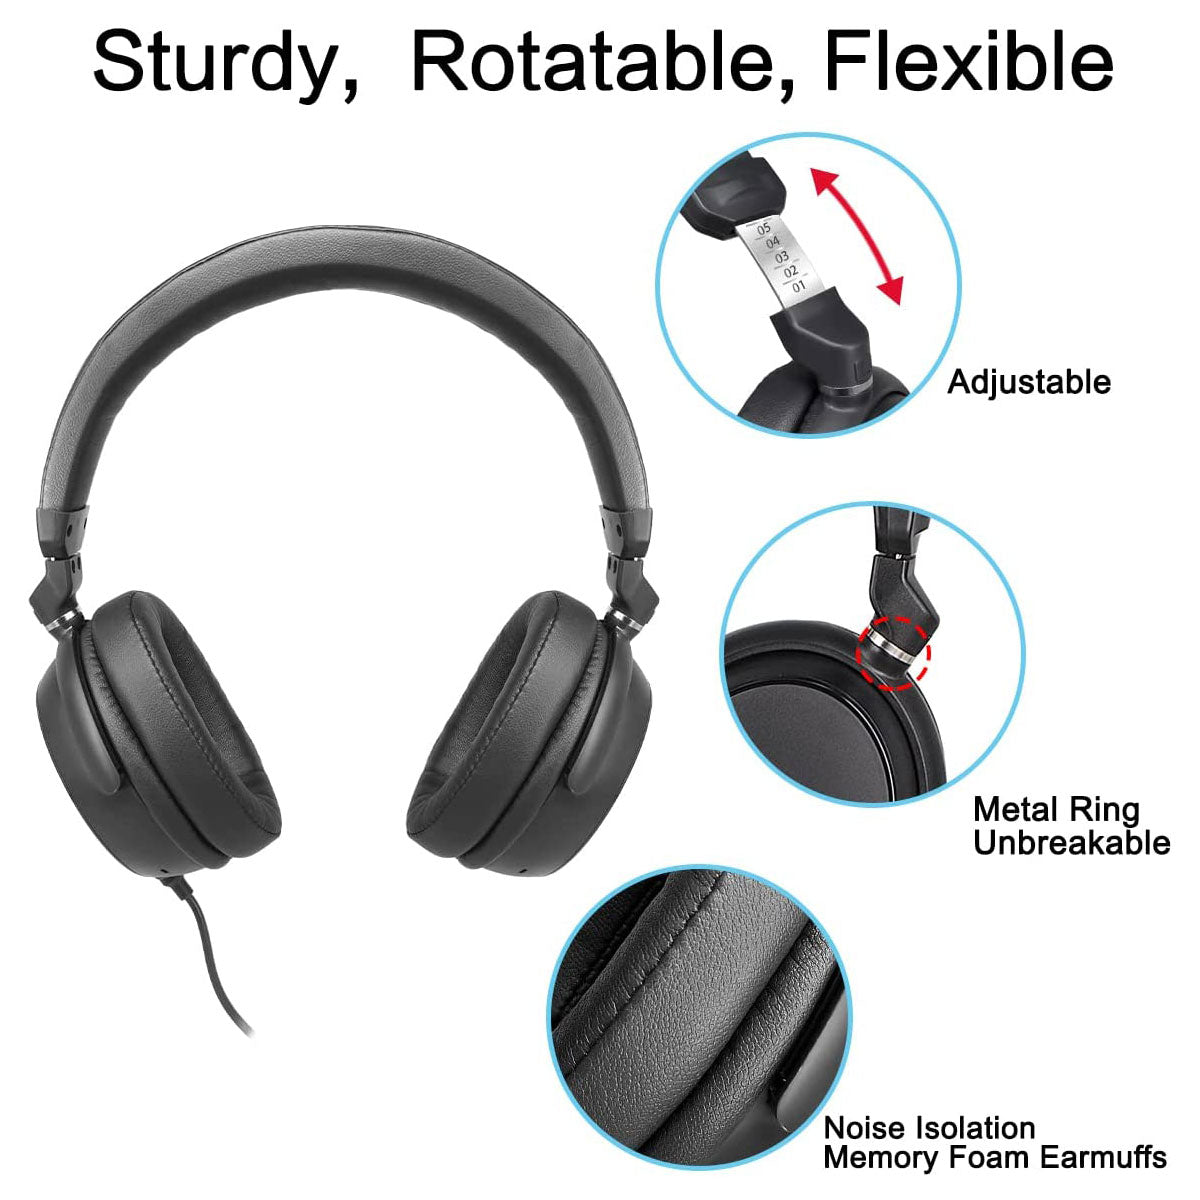 Simolio 906M wired over ear headphones flexiable rotatable sturdy